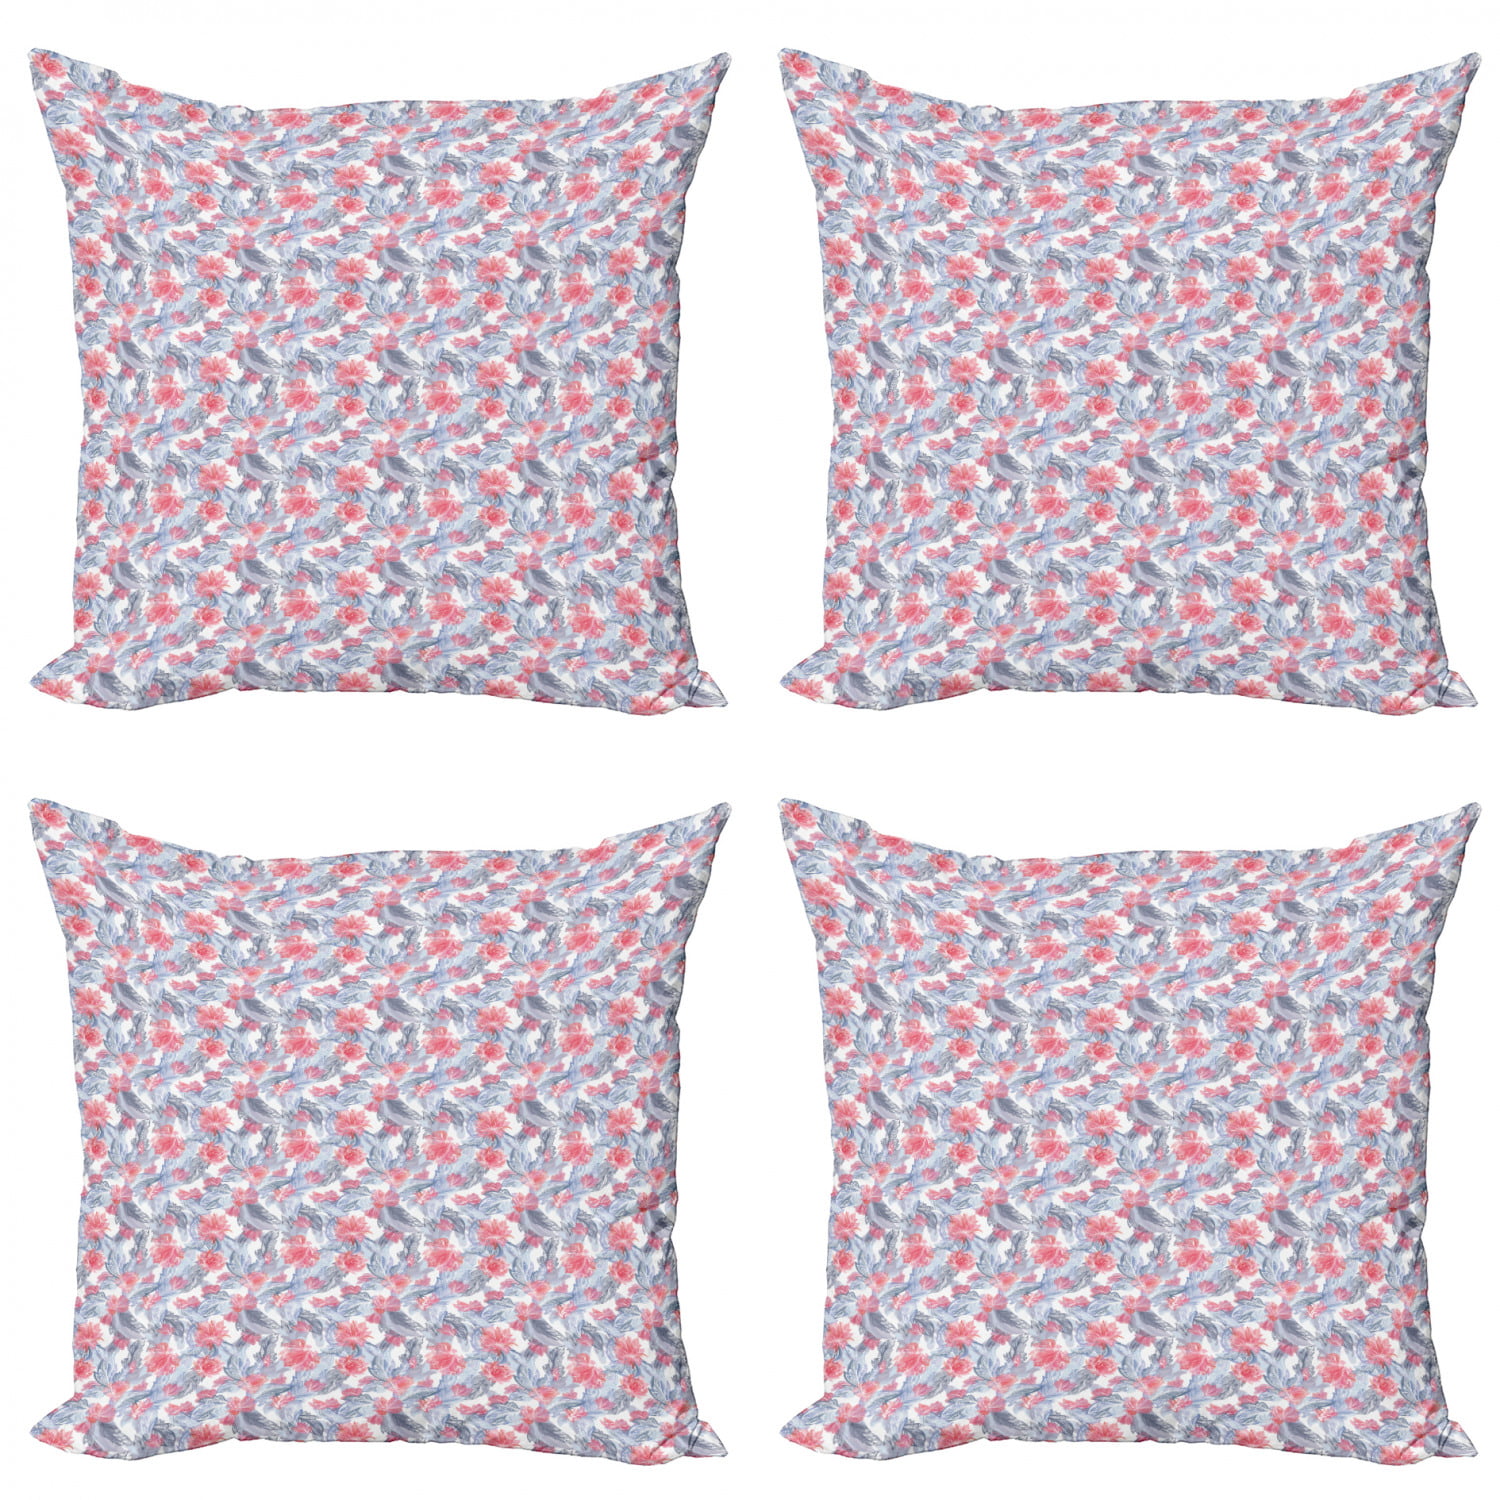 Details about   Flower Loutus Pillowcase Colorful Flower Throw Pillows 450mm*450mm Home Decor